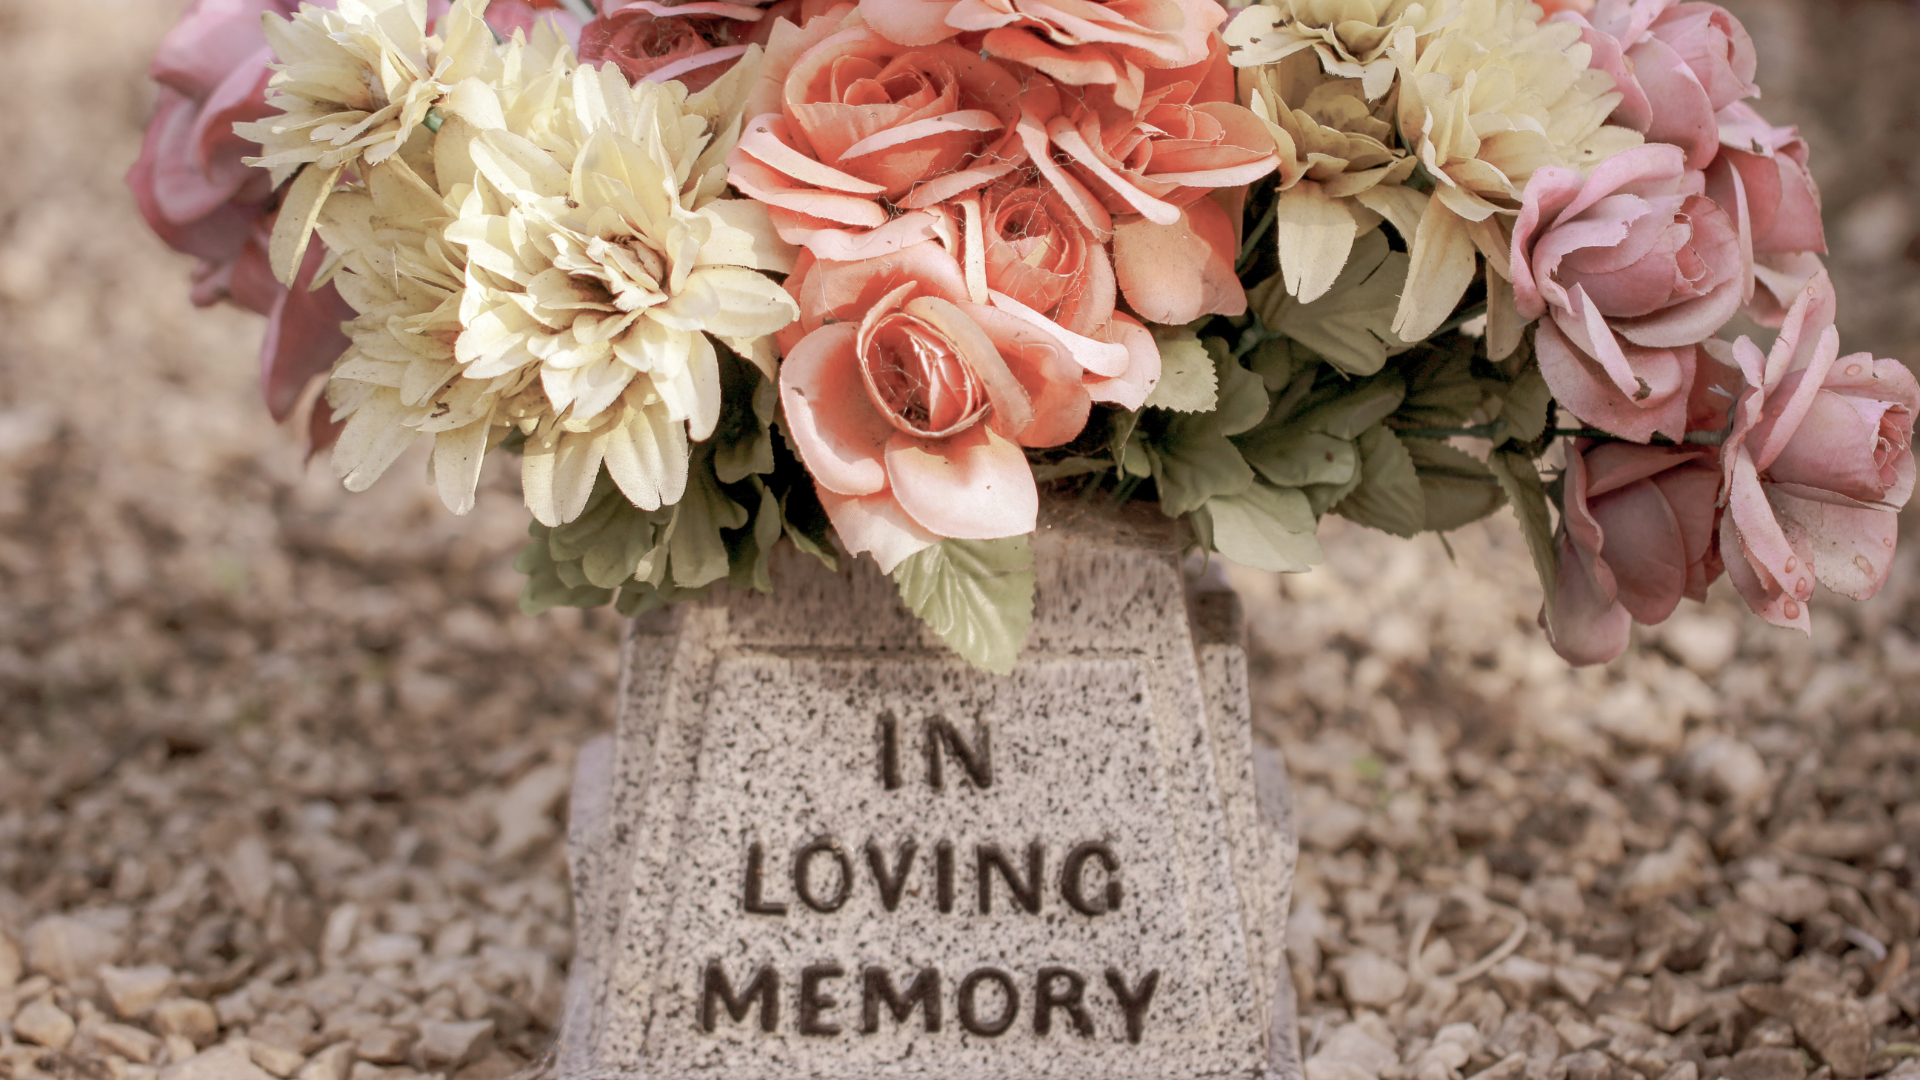 a tombstone that reads "In Loving Memory" with pink, white, and purple flowers placed on it